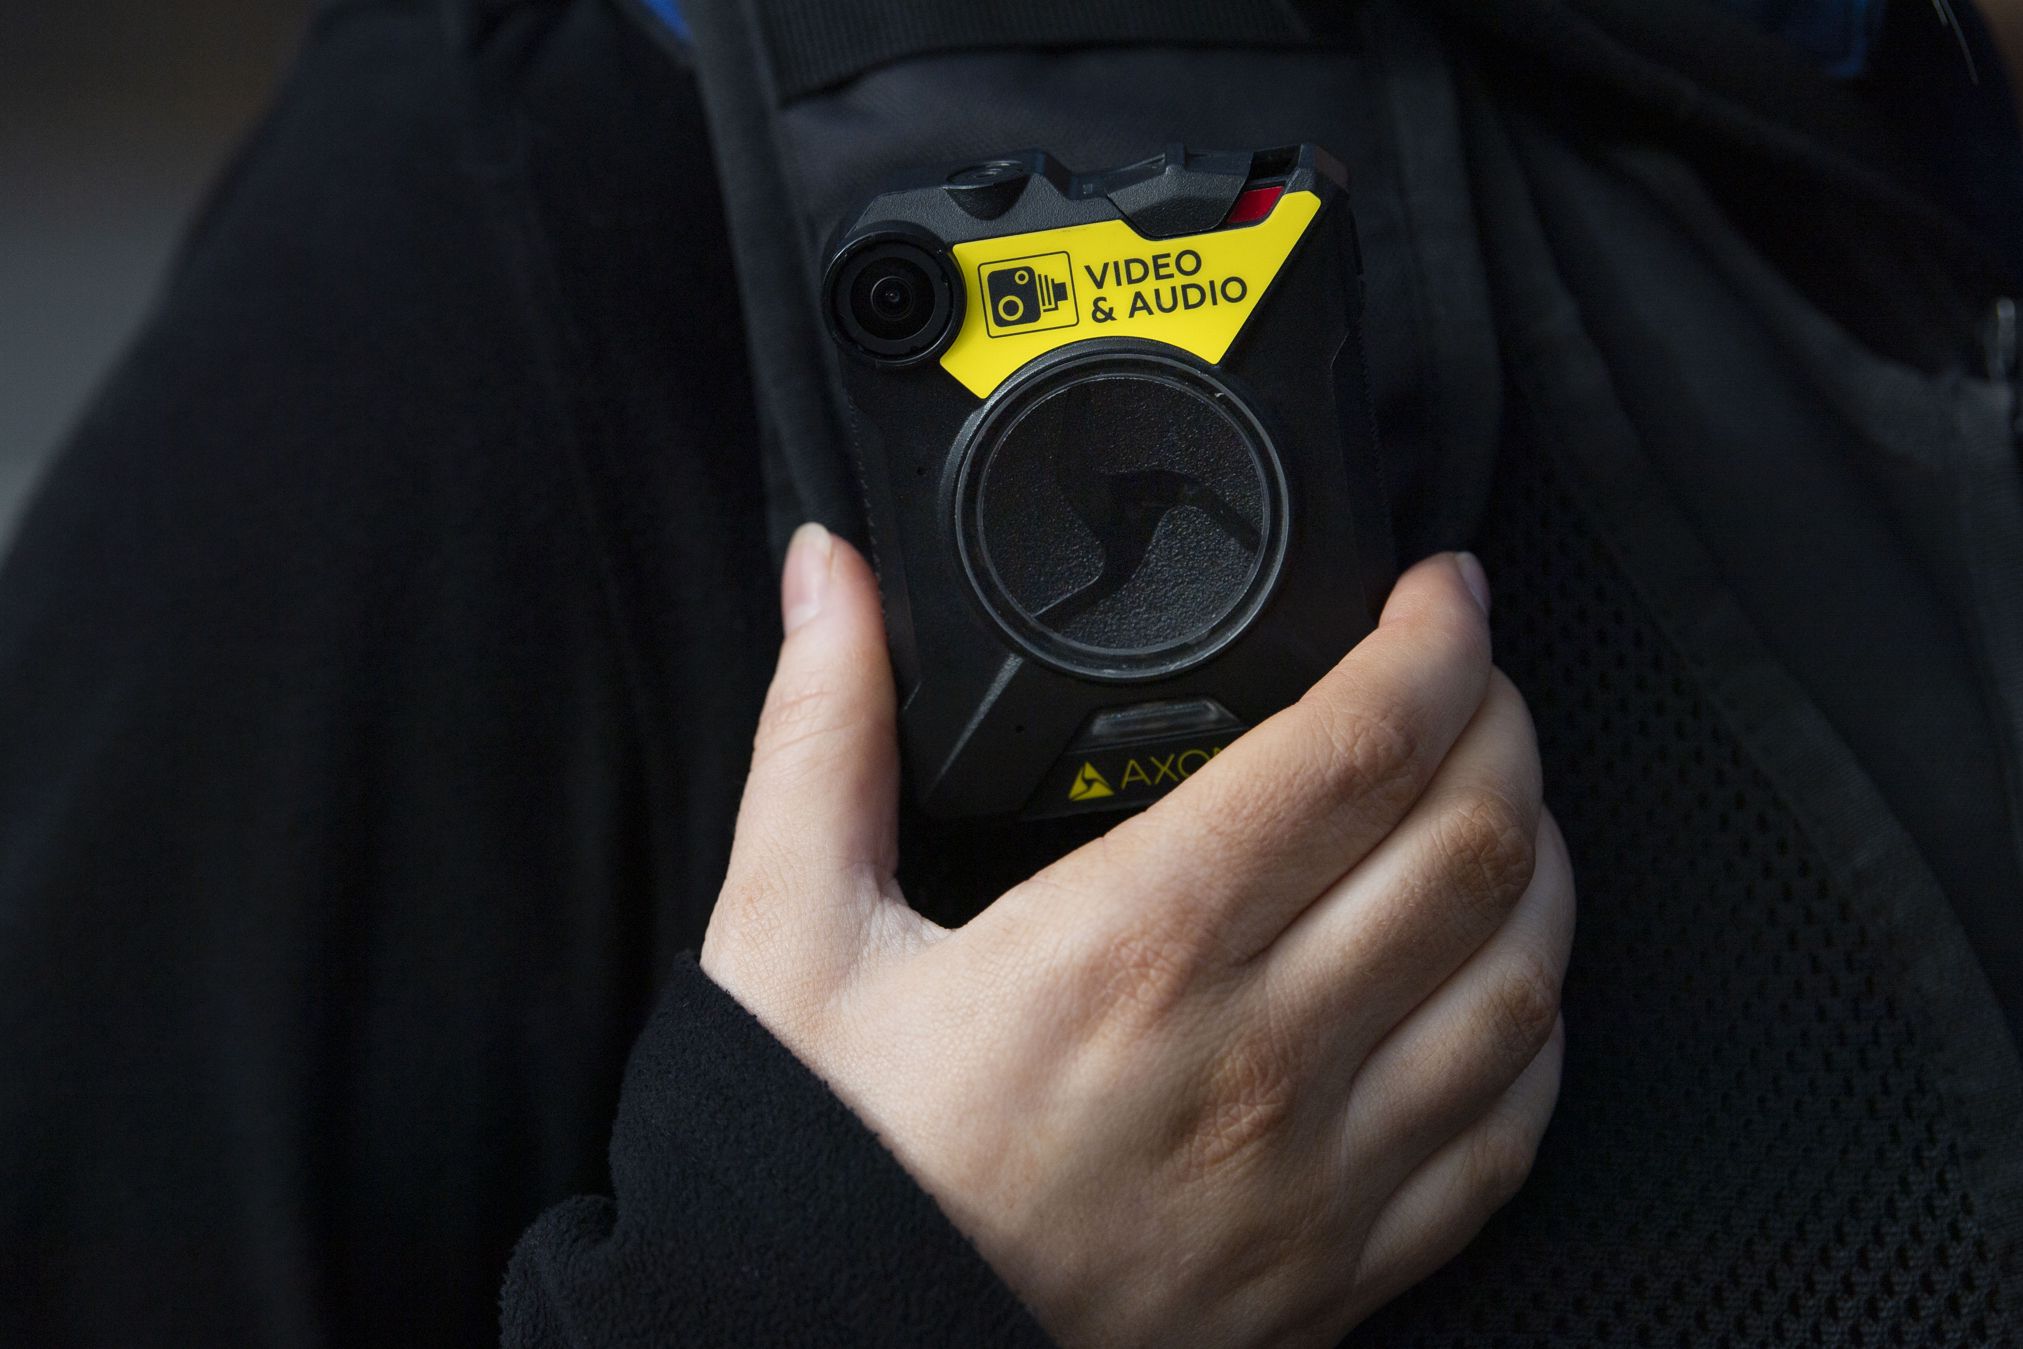 Police body cameras can be a positive accountability tool, but